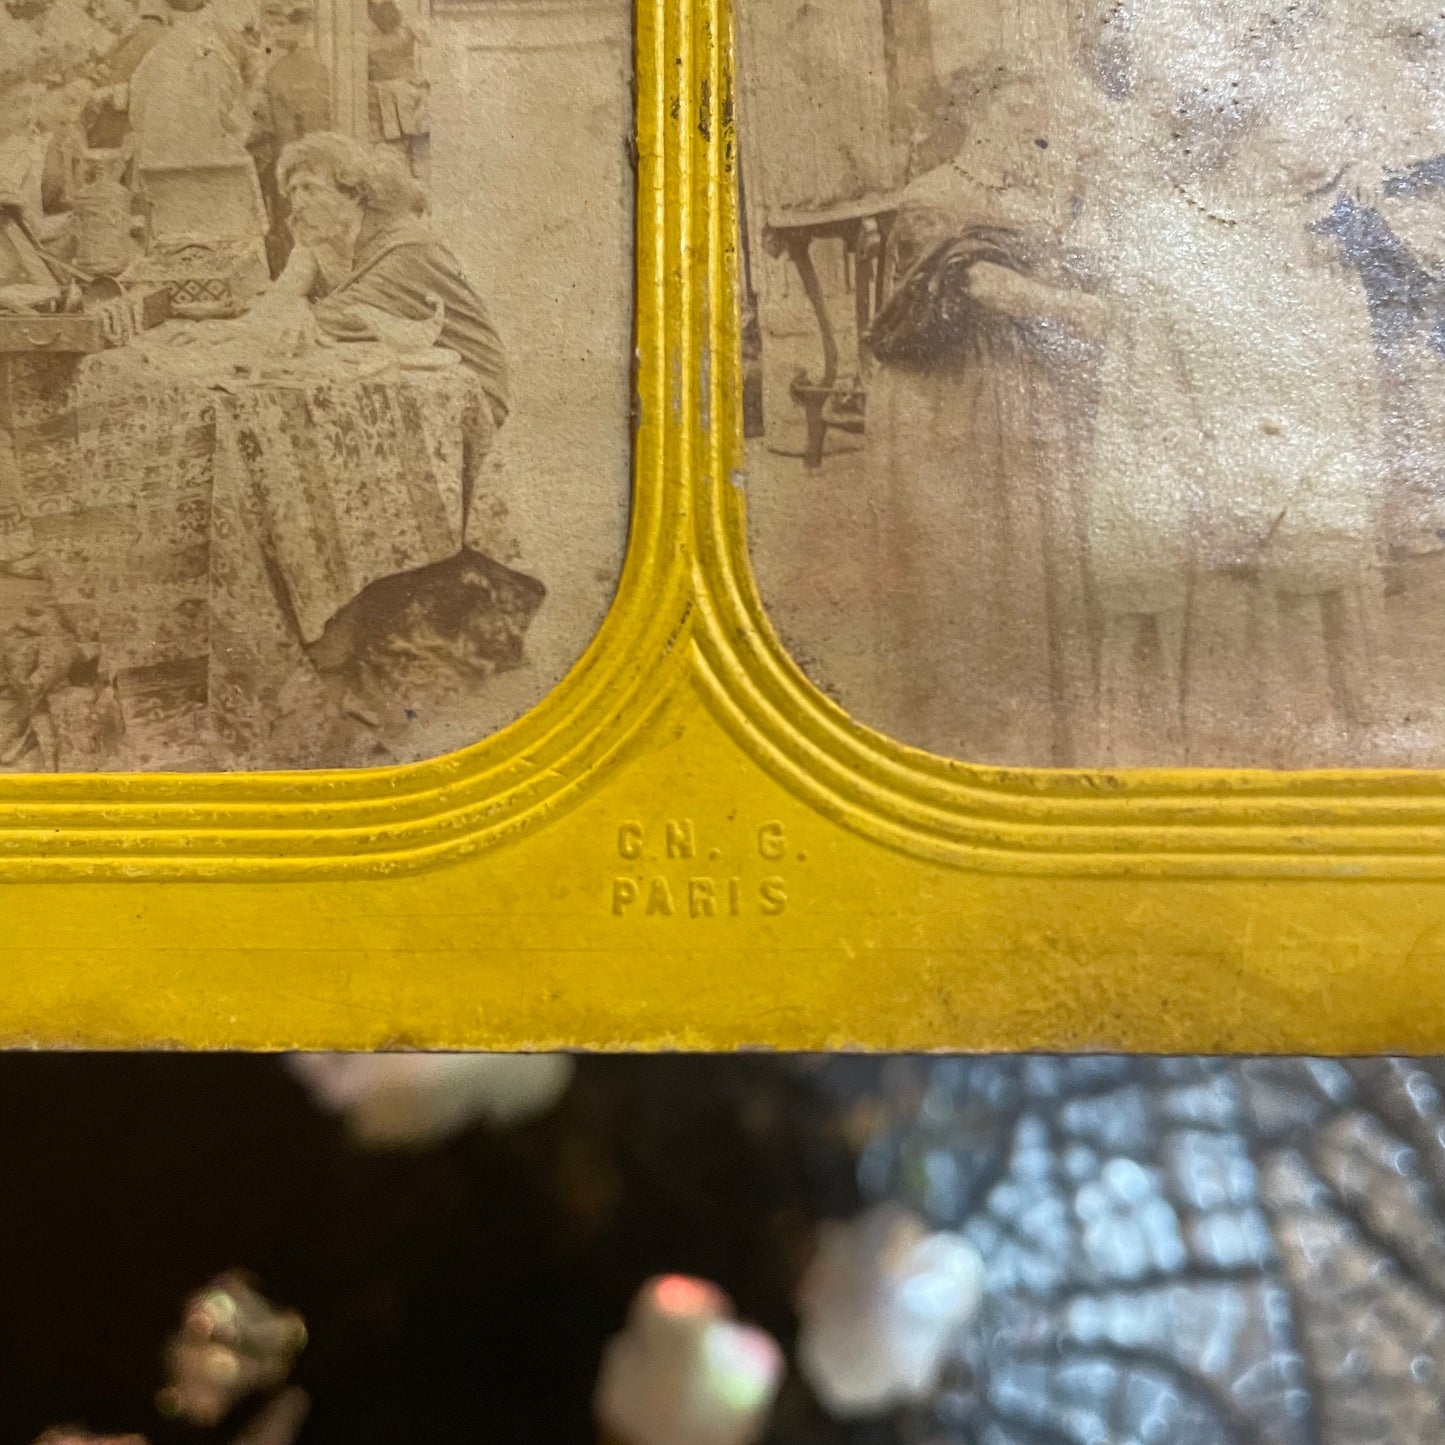 Antique Tissue Stereoview | A Dealer Exhibits his Wares